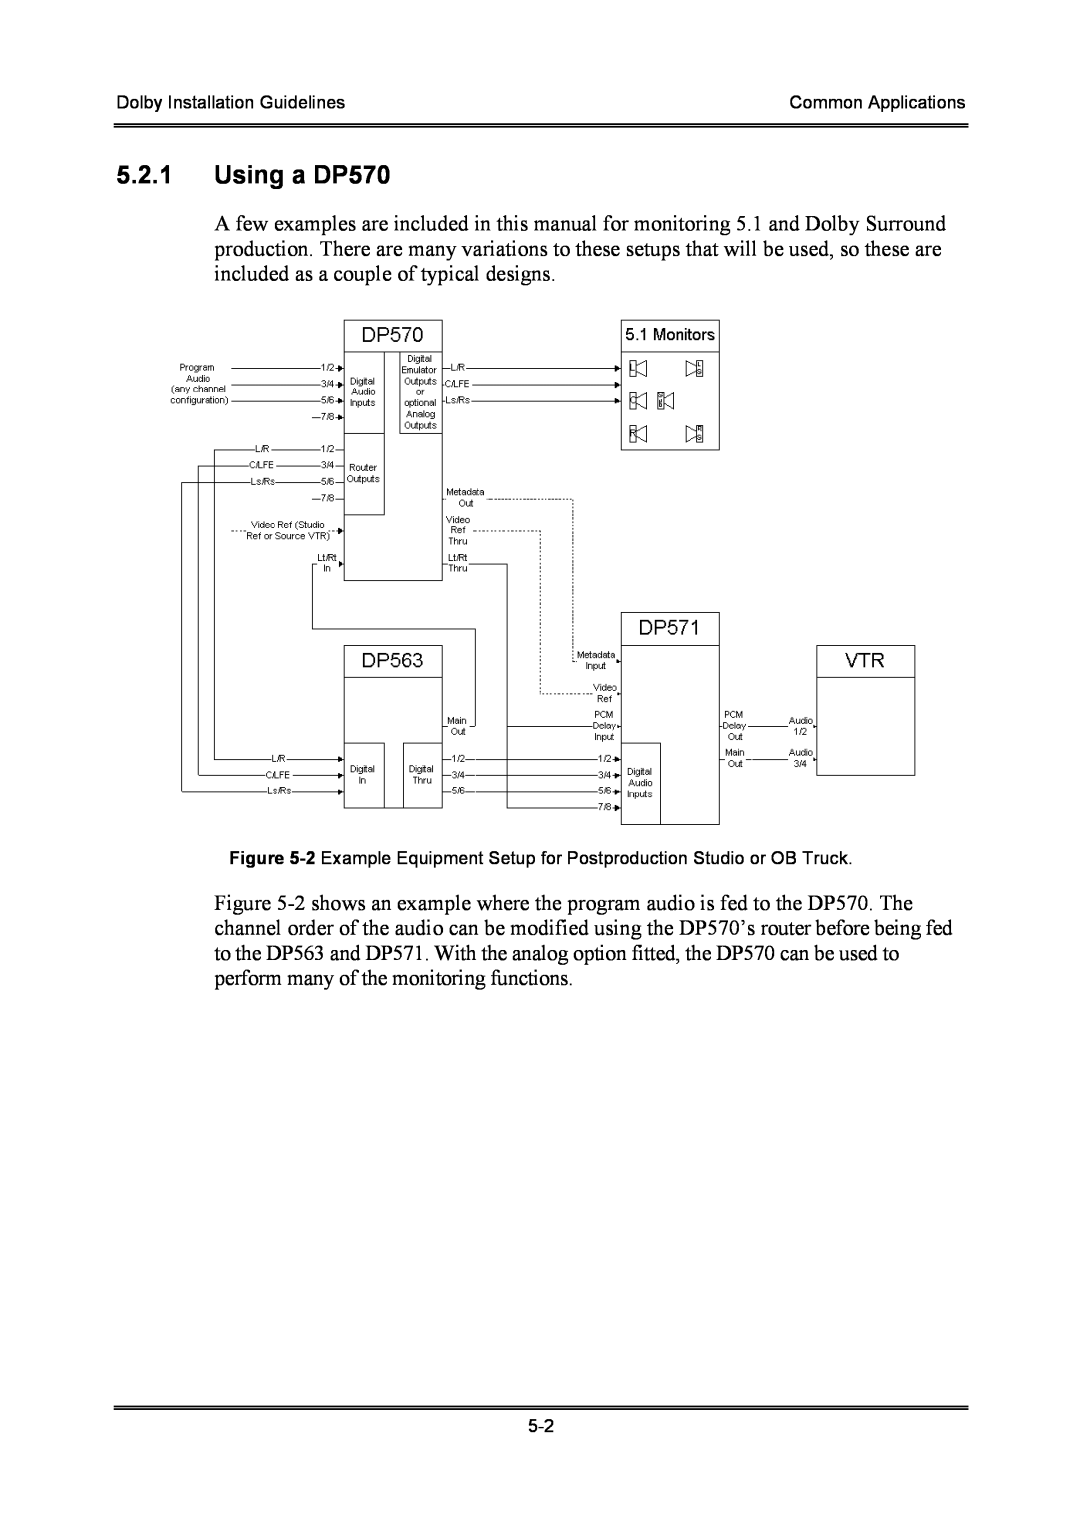 Dolby Laboratories S01/13621 manual 5.2.1Using a DP570, Dolby Installation Guidelines, Common Applications 